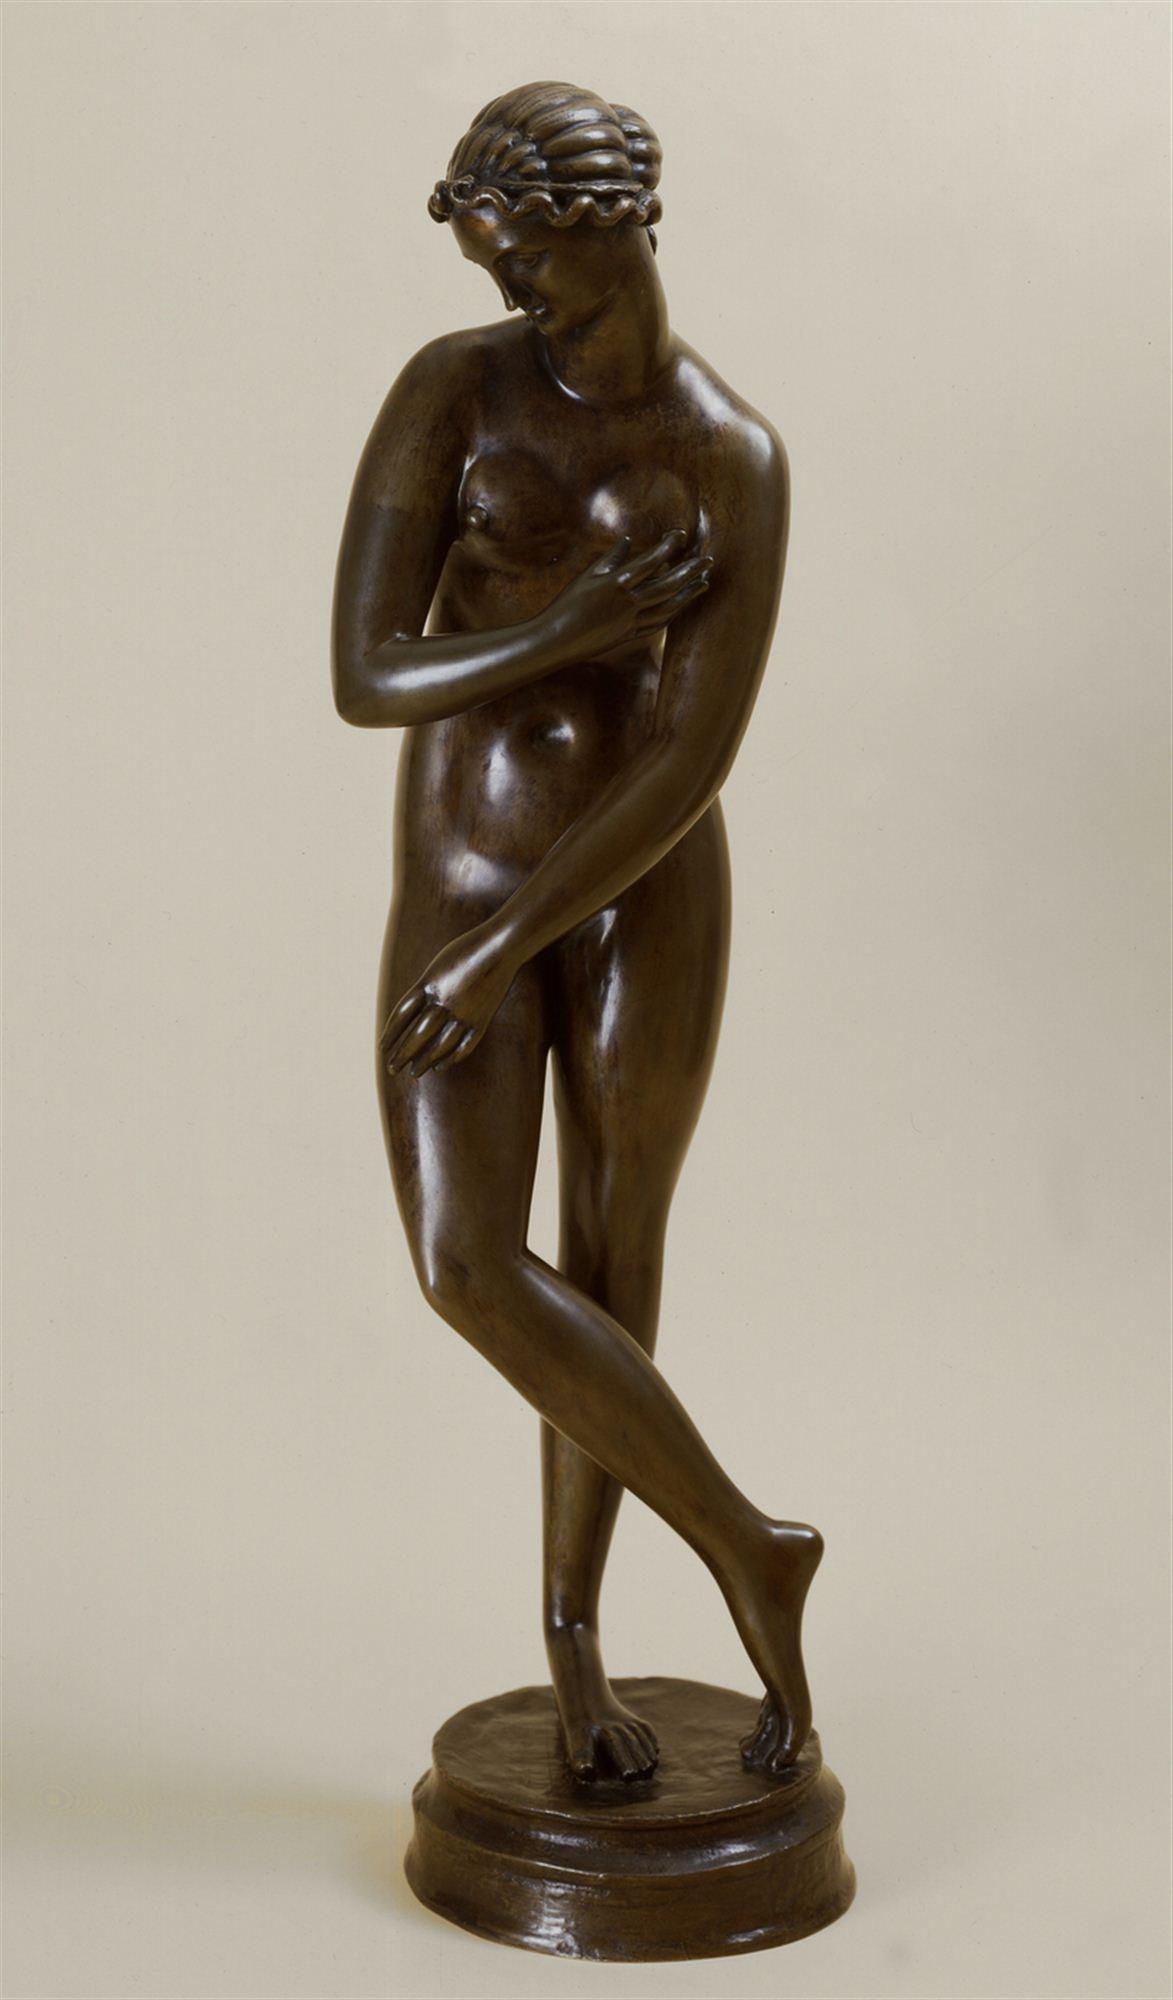 

											American Figurative  </b>

											<em>
												Now on view in New York</em> 

											<h4>
																							</h4>

		                																																													<i>Elie Nadelman,</i>  
																																								Standing Nude, 1912-13, 
																																								Bronze, 
																																								24 1/2 inches 
																								
		                				